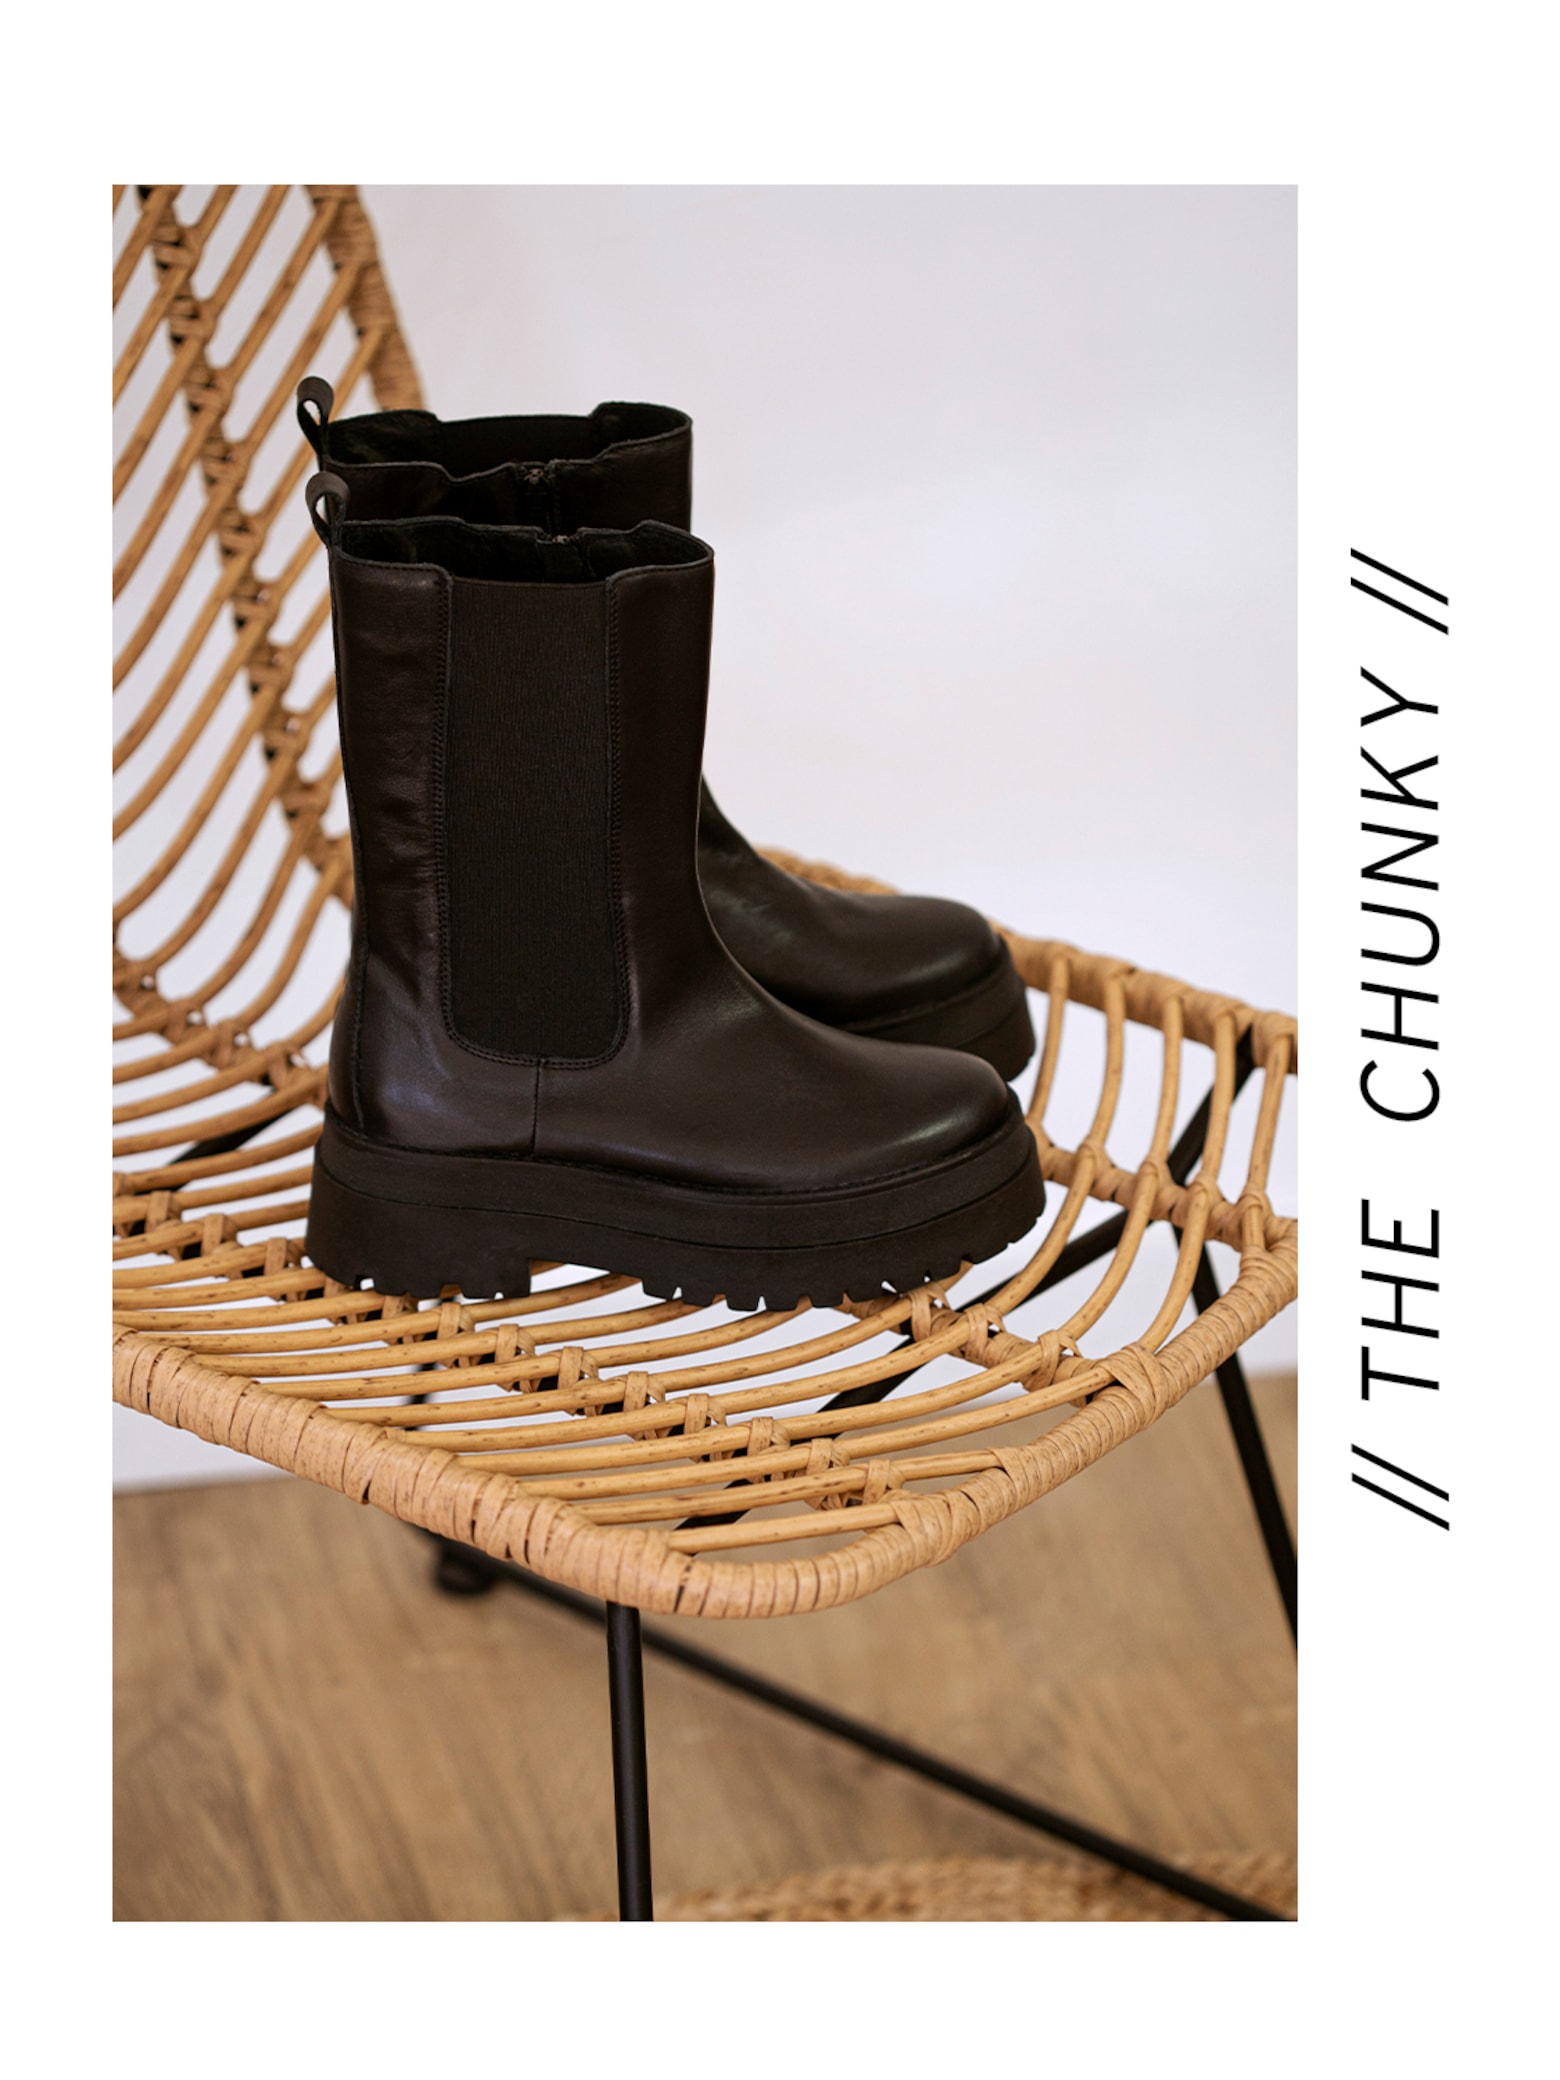 Chunky, slouchy & Co. New Boot Trends